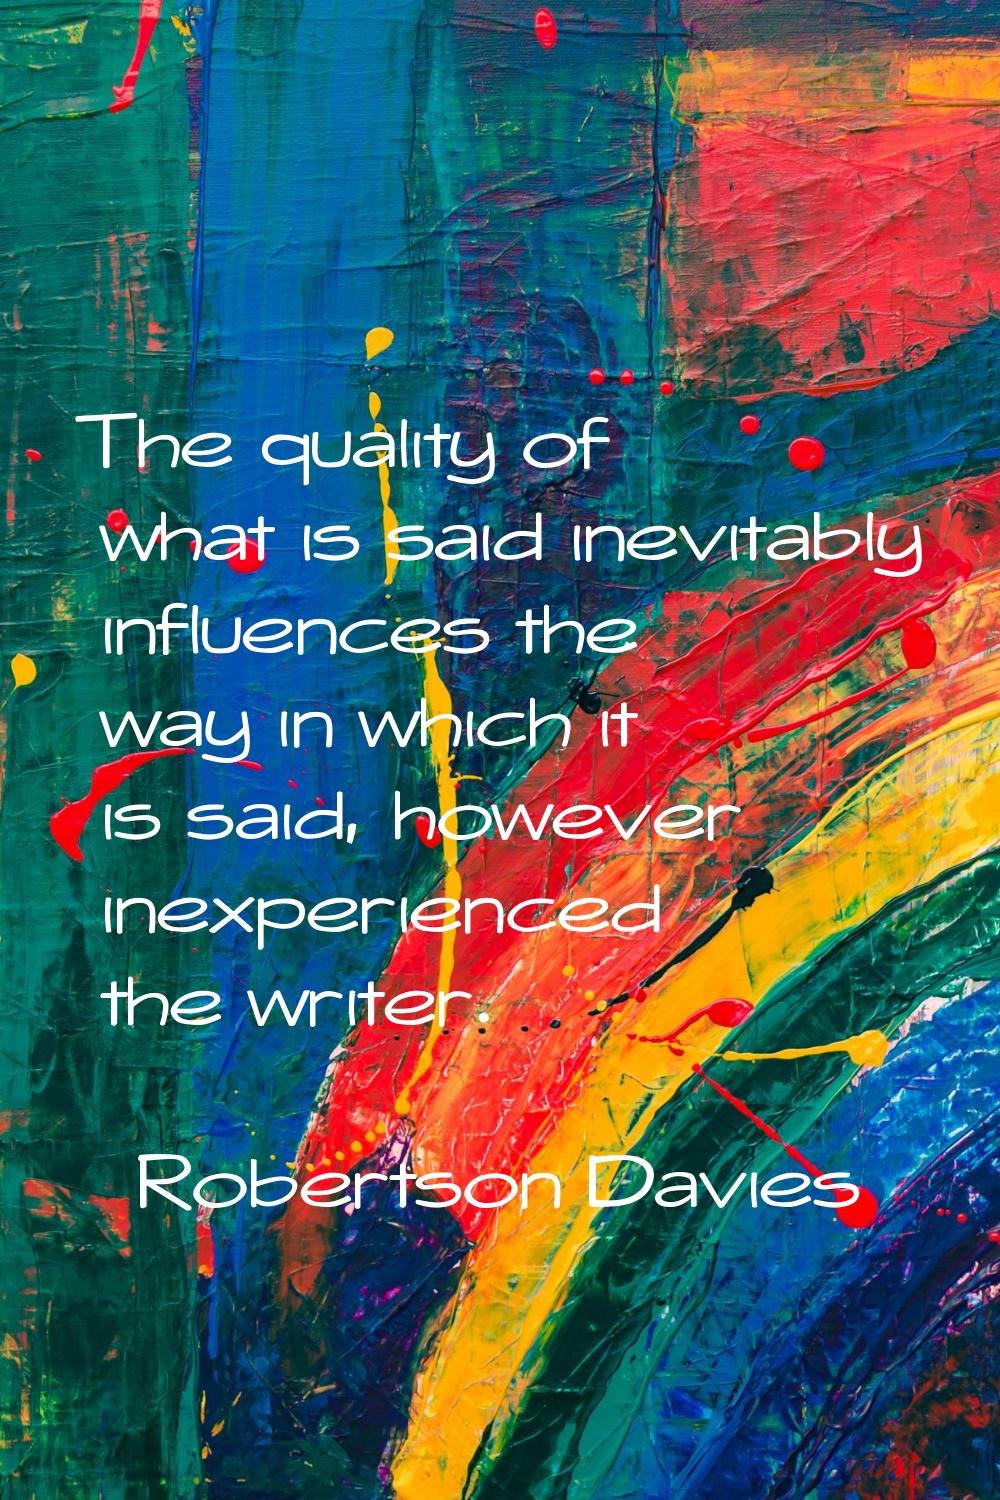 The quality of what is said inevitably influences the way in which it is said, however inexperience